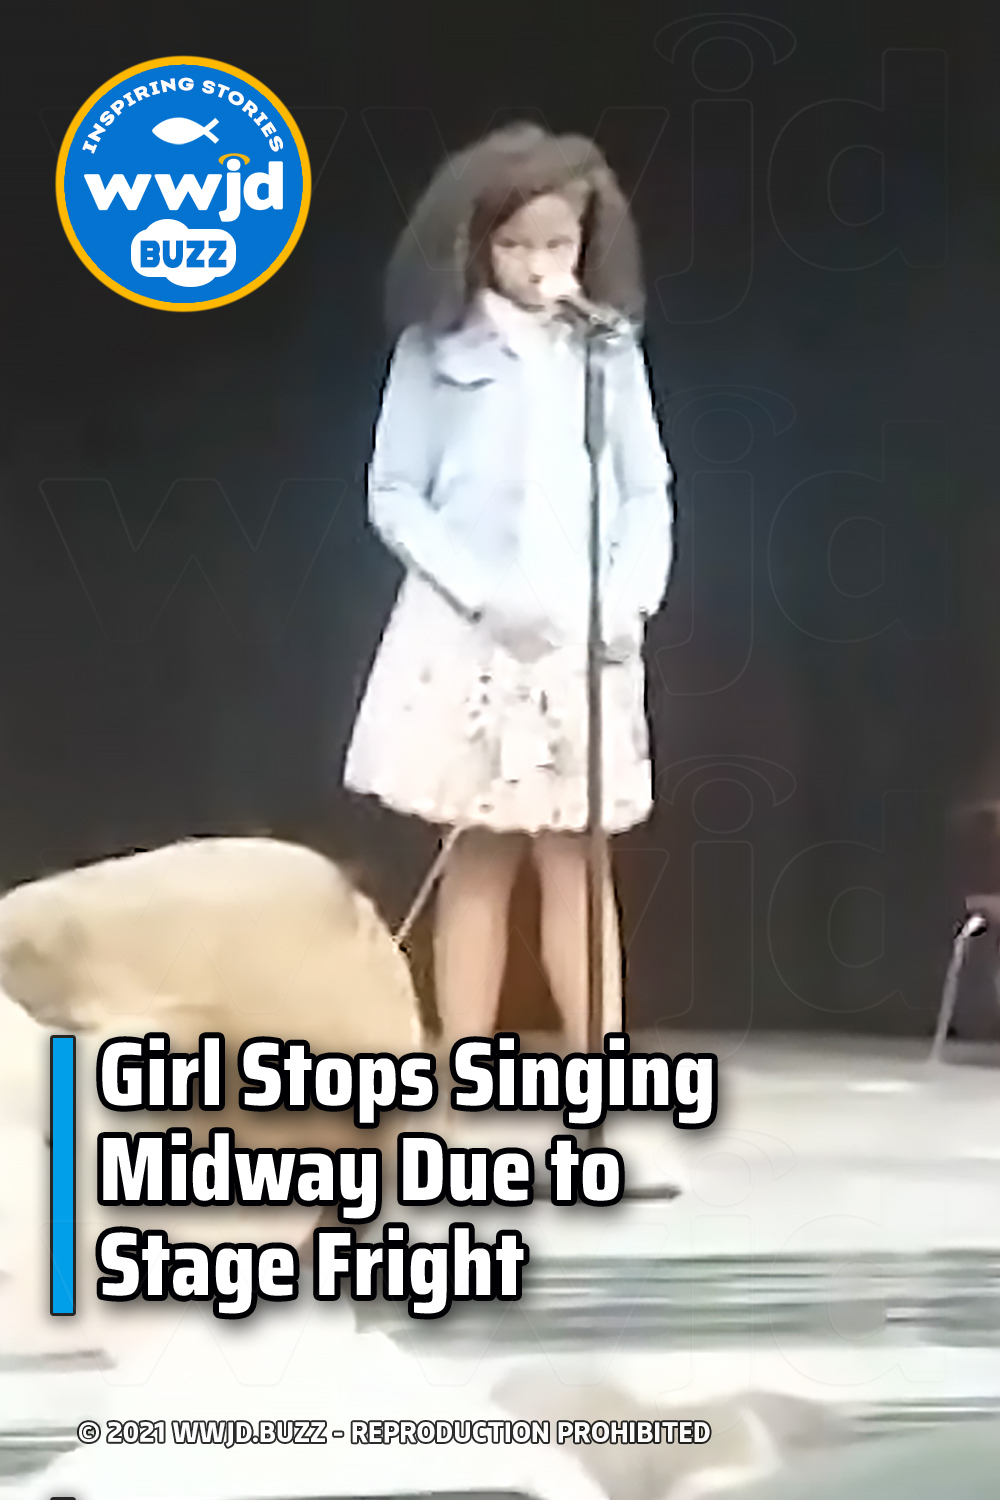 Girl Stops Singing Midway Due to Stage Fright